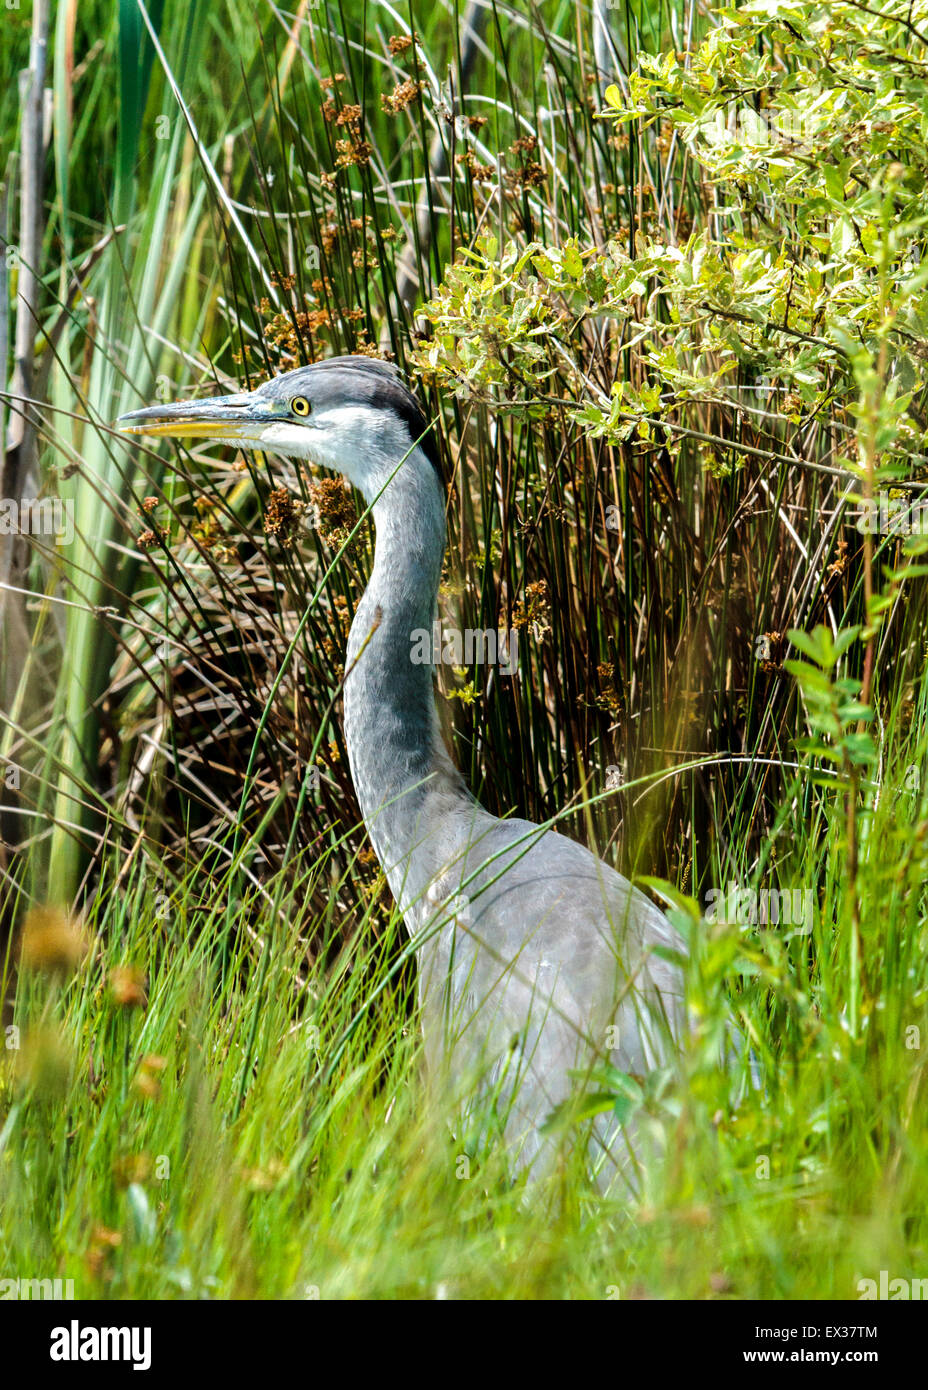 Heron at rest Stock Photo